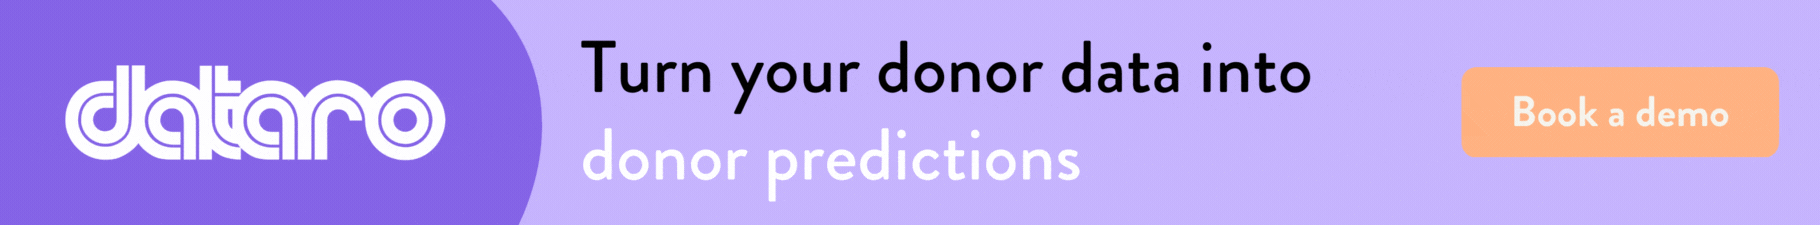 Dataro - turn your donor data into donor predictions